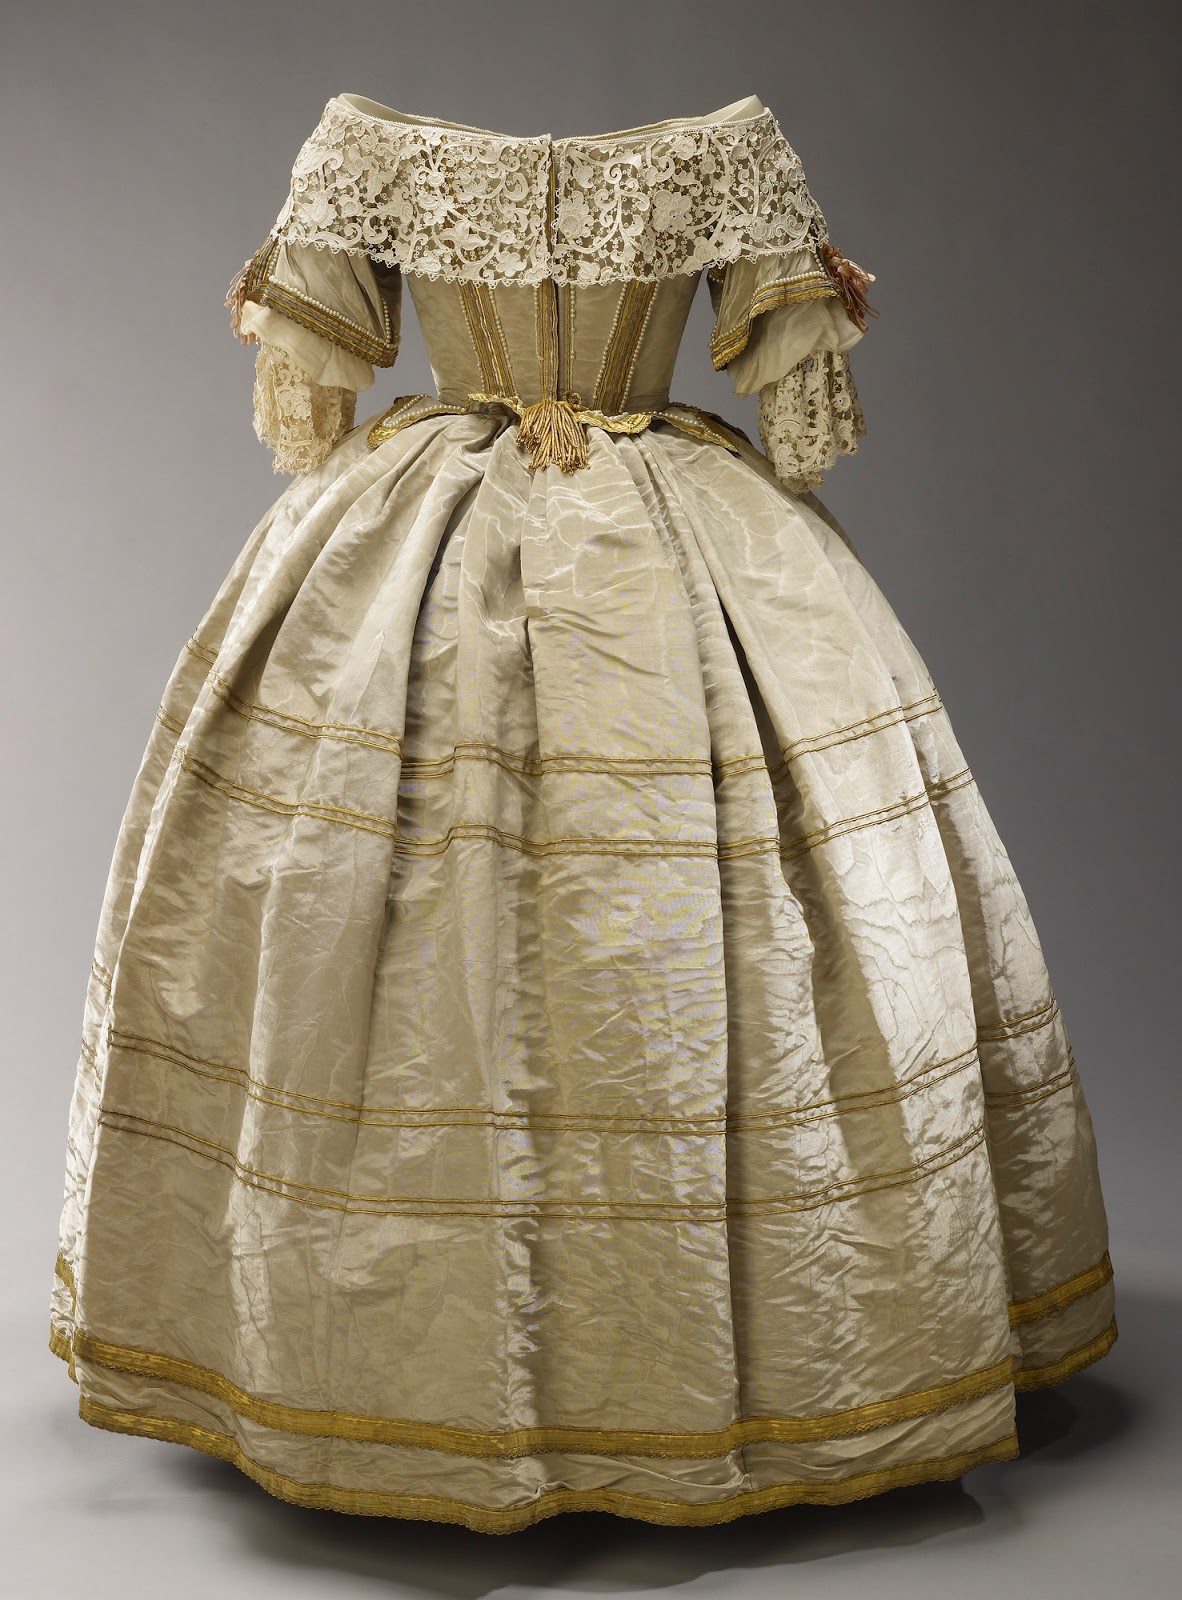 Louisa Anne Beresford, Marchioness of Waterford (1818-91) - Costume worn by  the Marchioness of Waterford at the Stuart Costume Ball at Buckingham  Palace, 13 June 1851